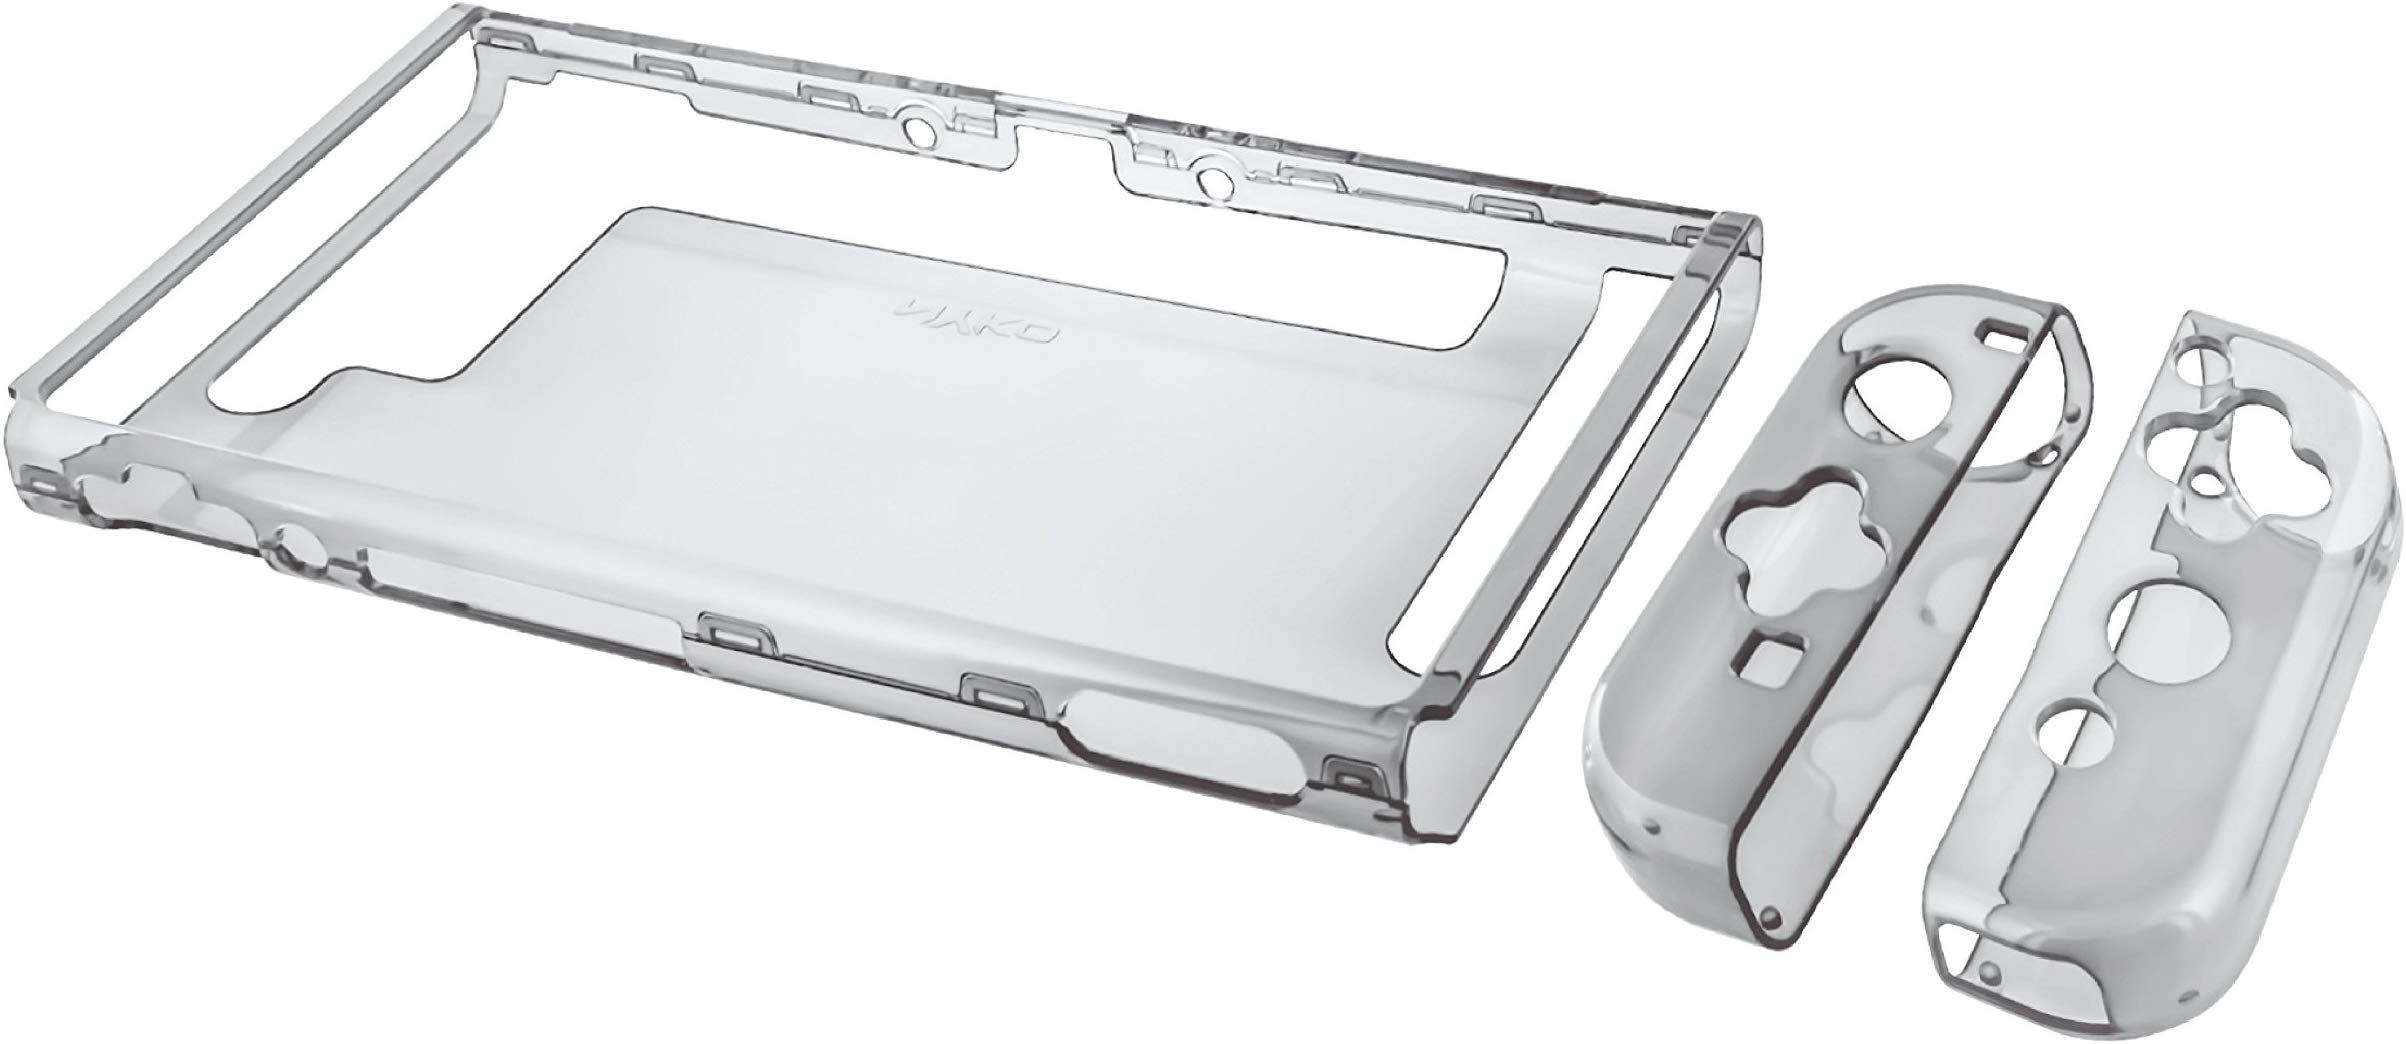 nintendo switch case clear